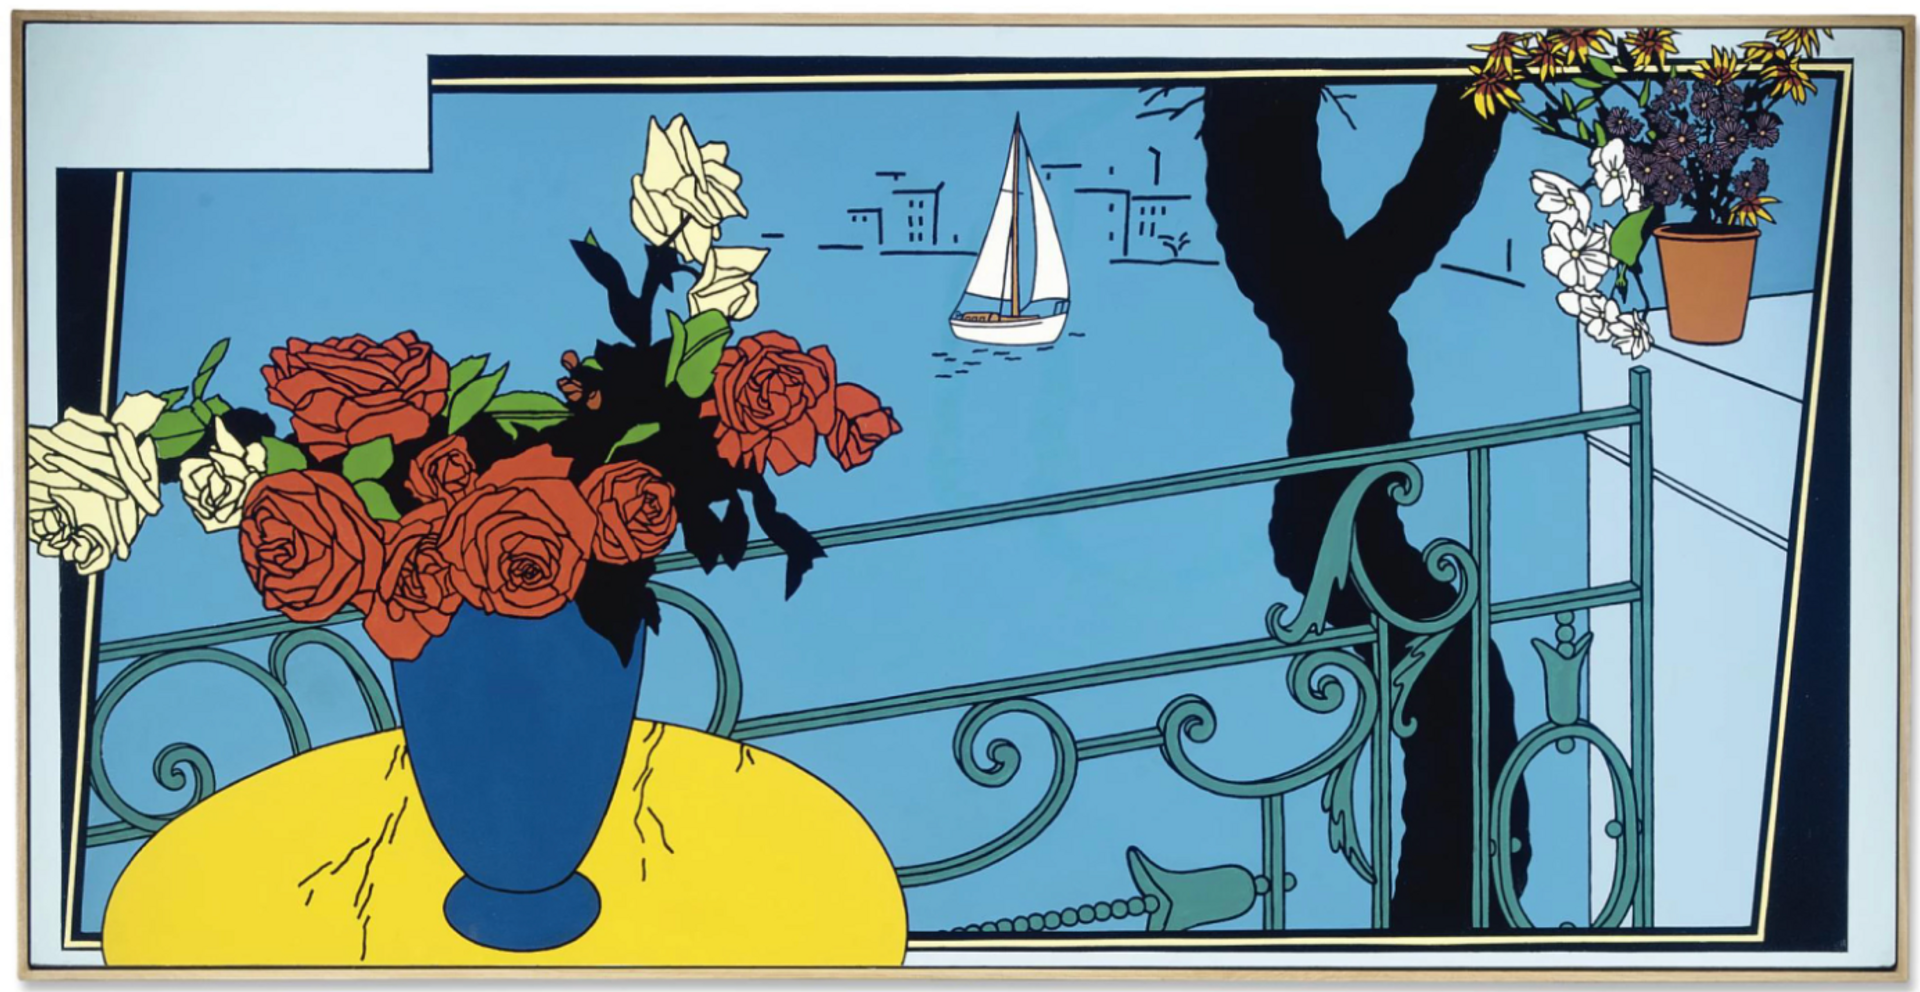 Panoramic view of a coastal harbour seen through a window. In the foreground, there is a yellow table with a blue vase filled with red and white roses. Through the window, a finely adorned gate is visible, as well as a black tree and a white sailboat in the water in the distance.